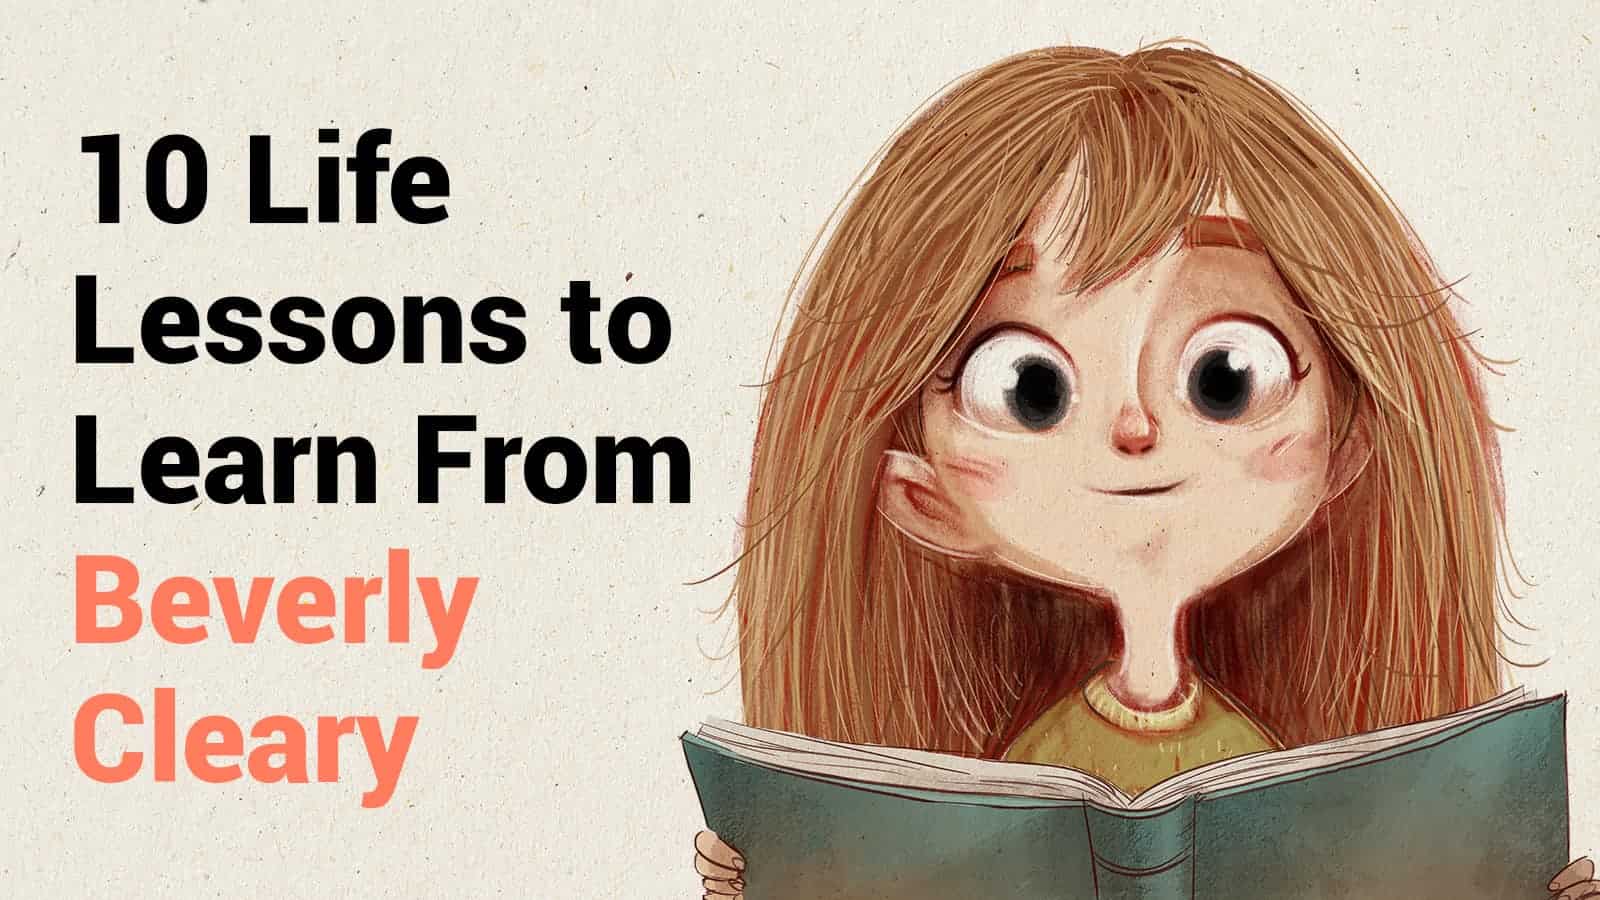 10 Life Lessons to Learn from Beverly Cleary